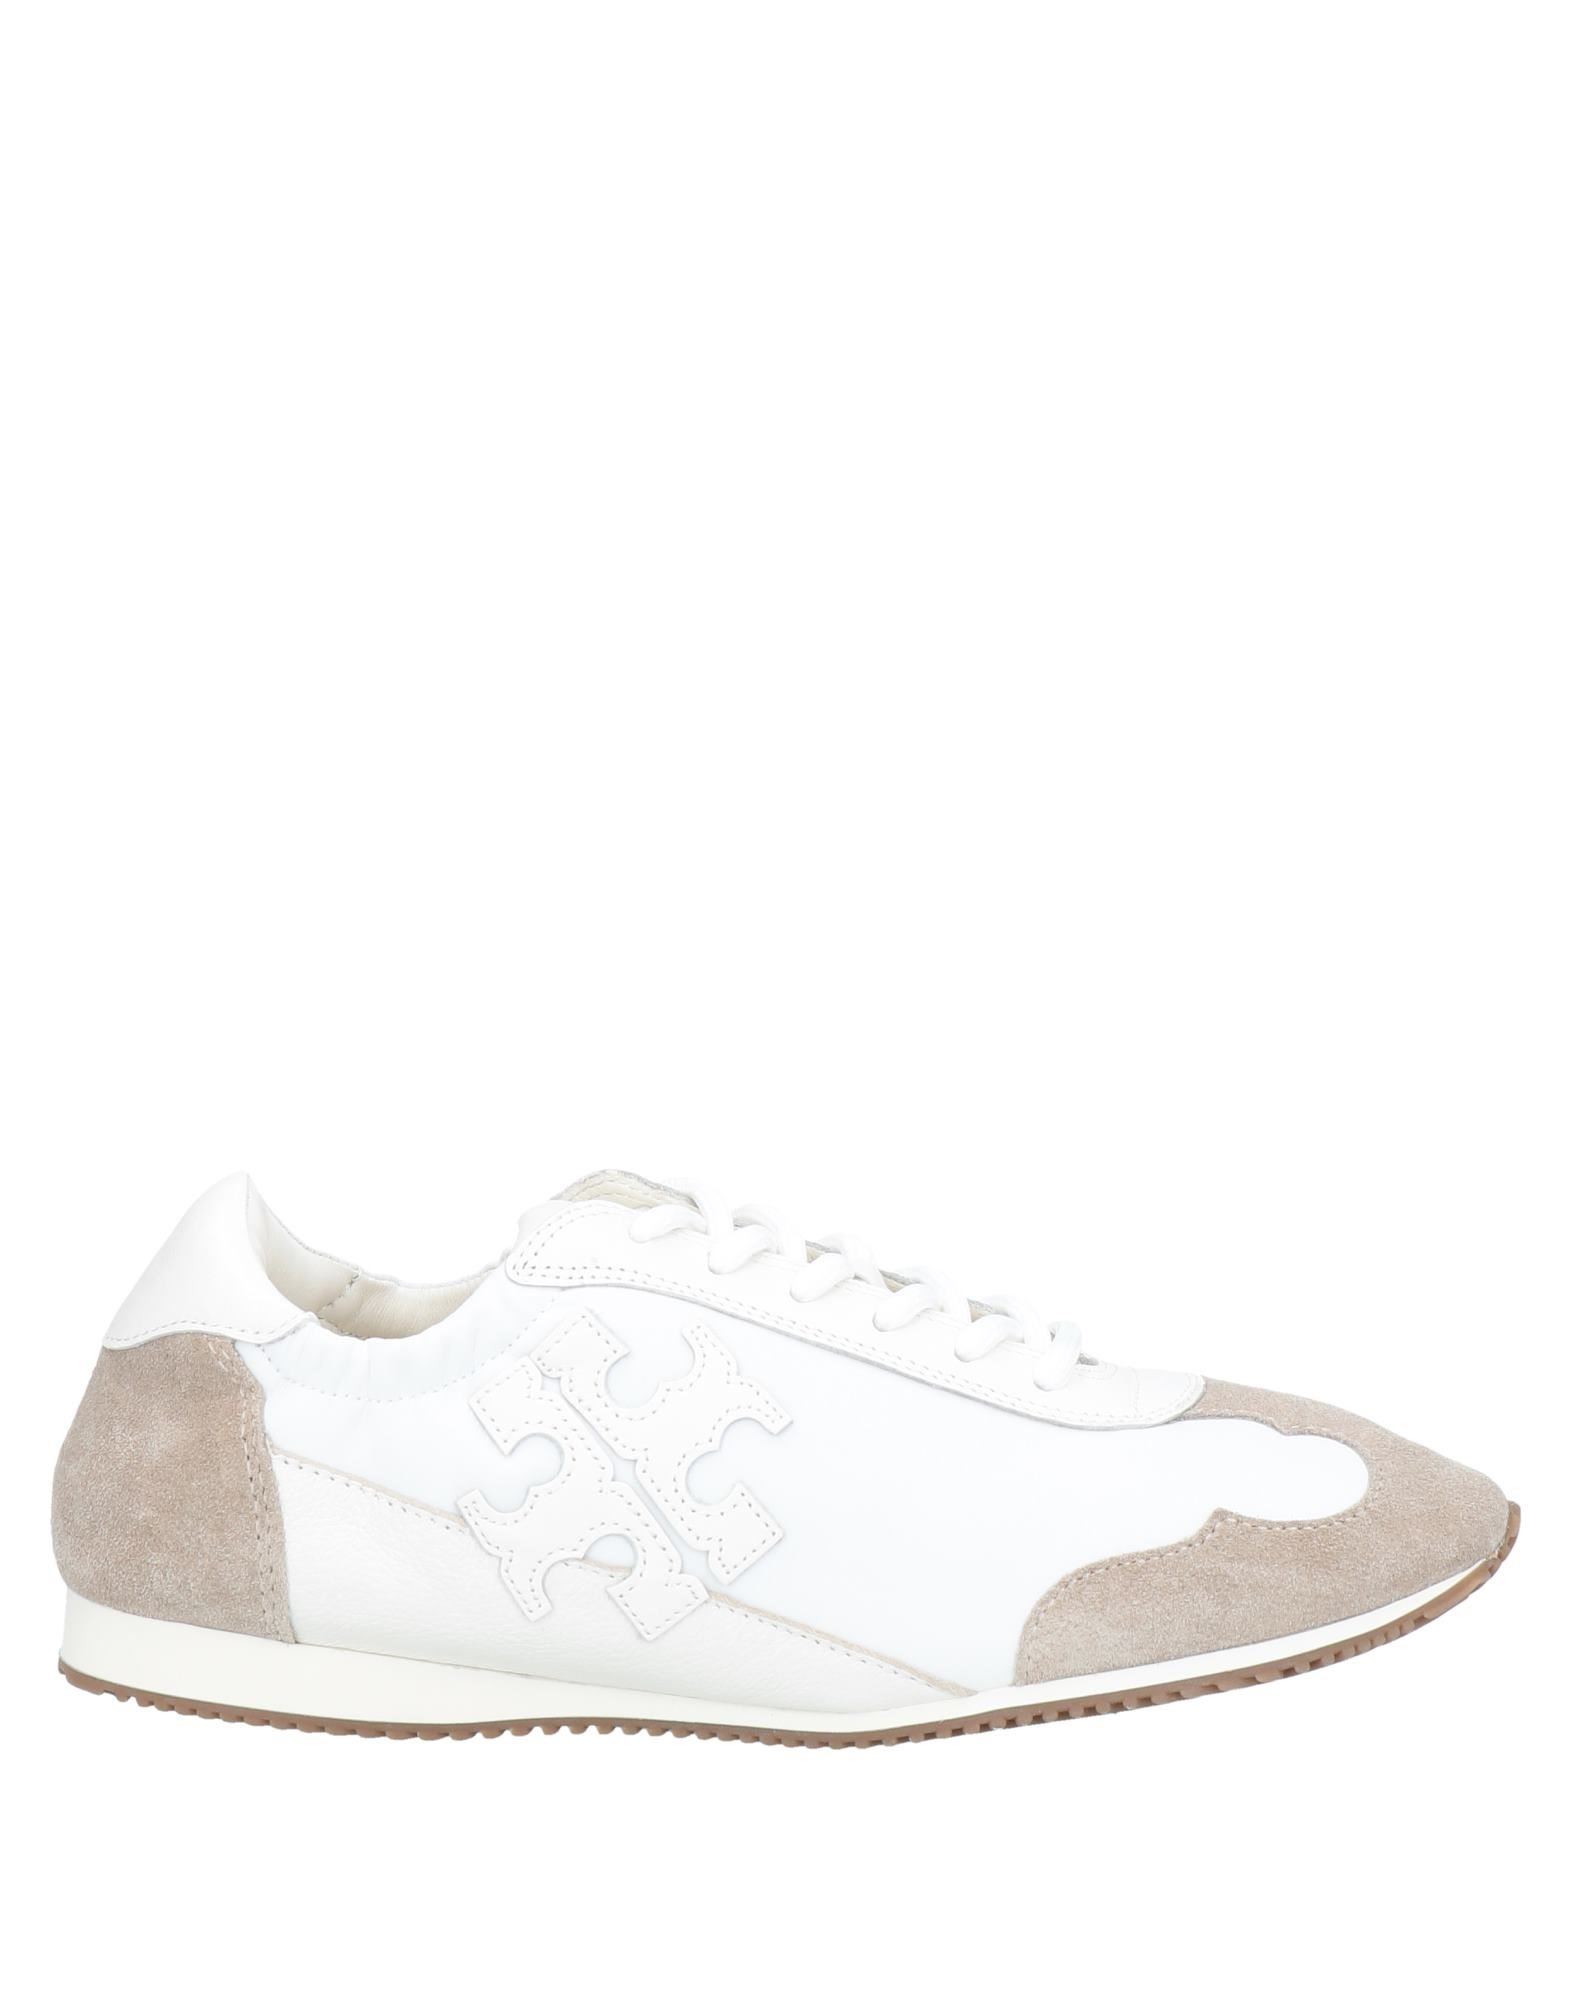 Tory Burch Sneakers In White | ModeSens